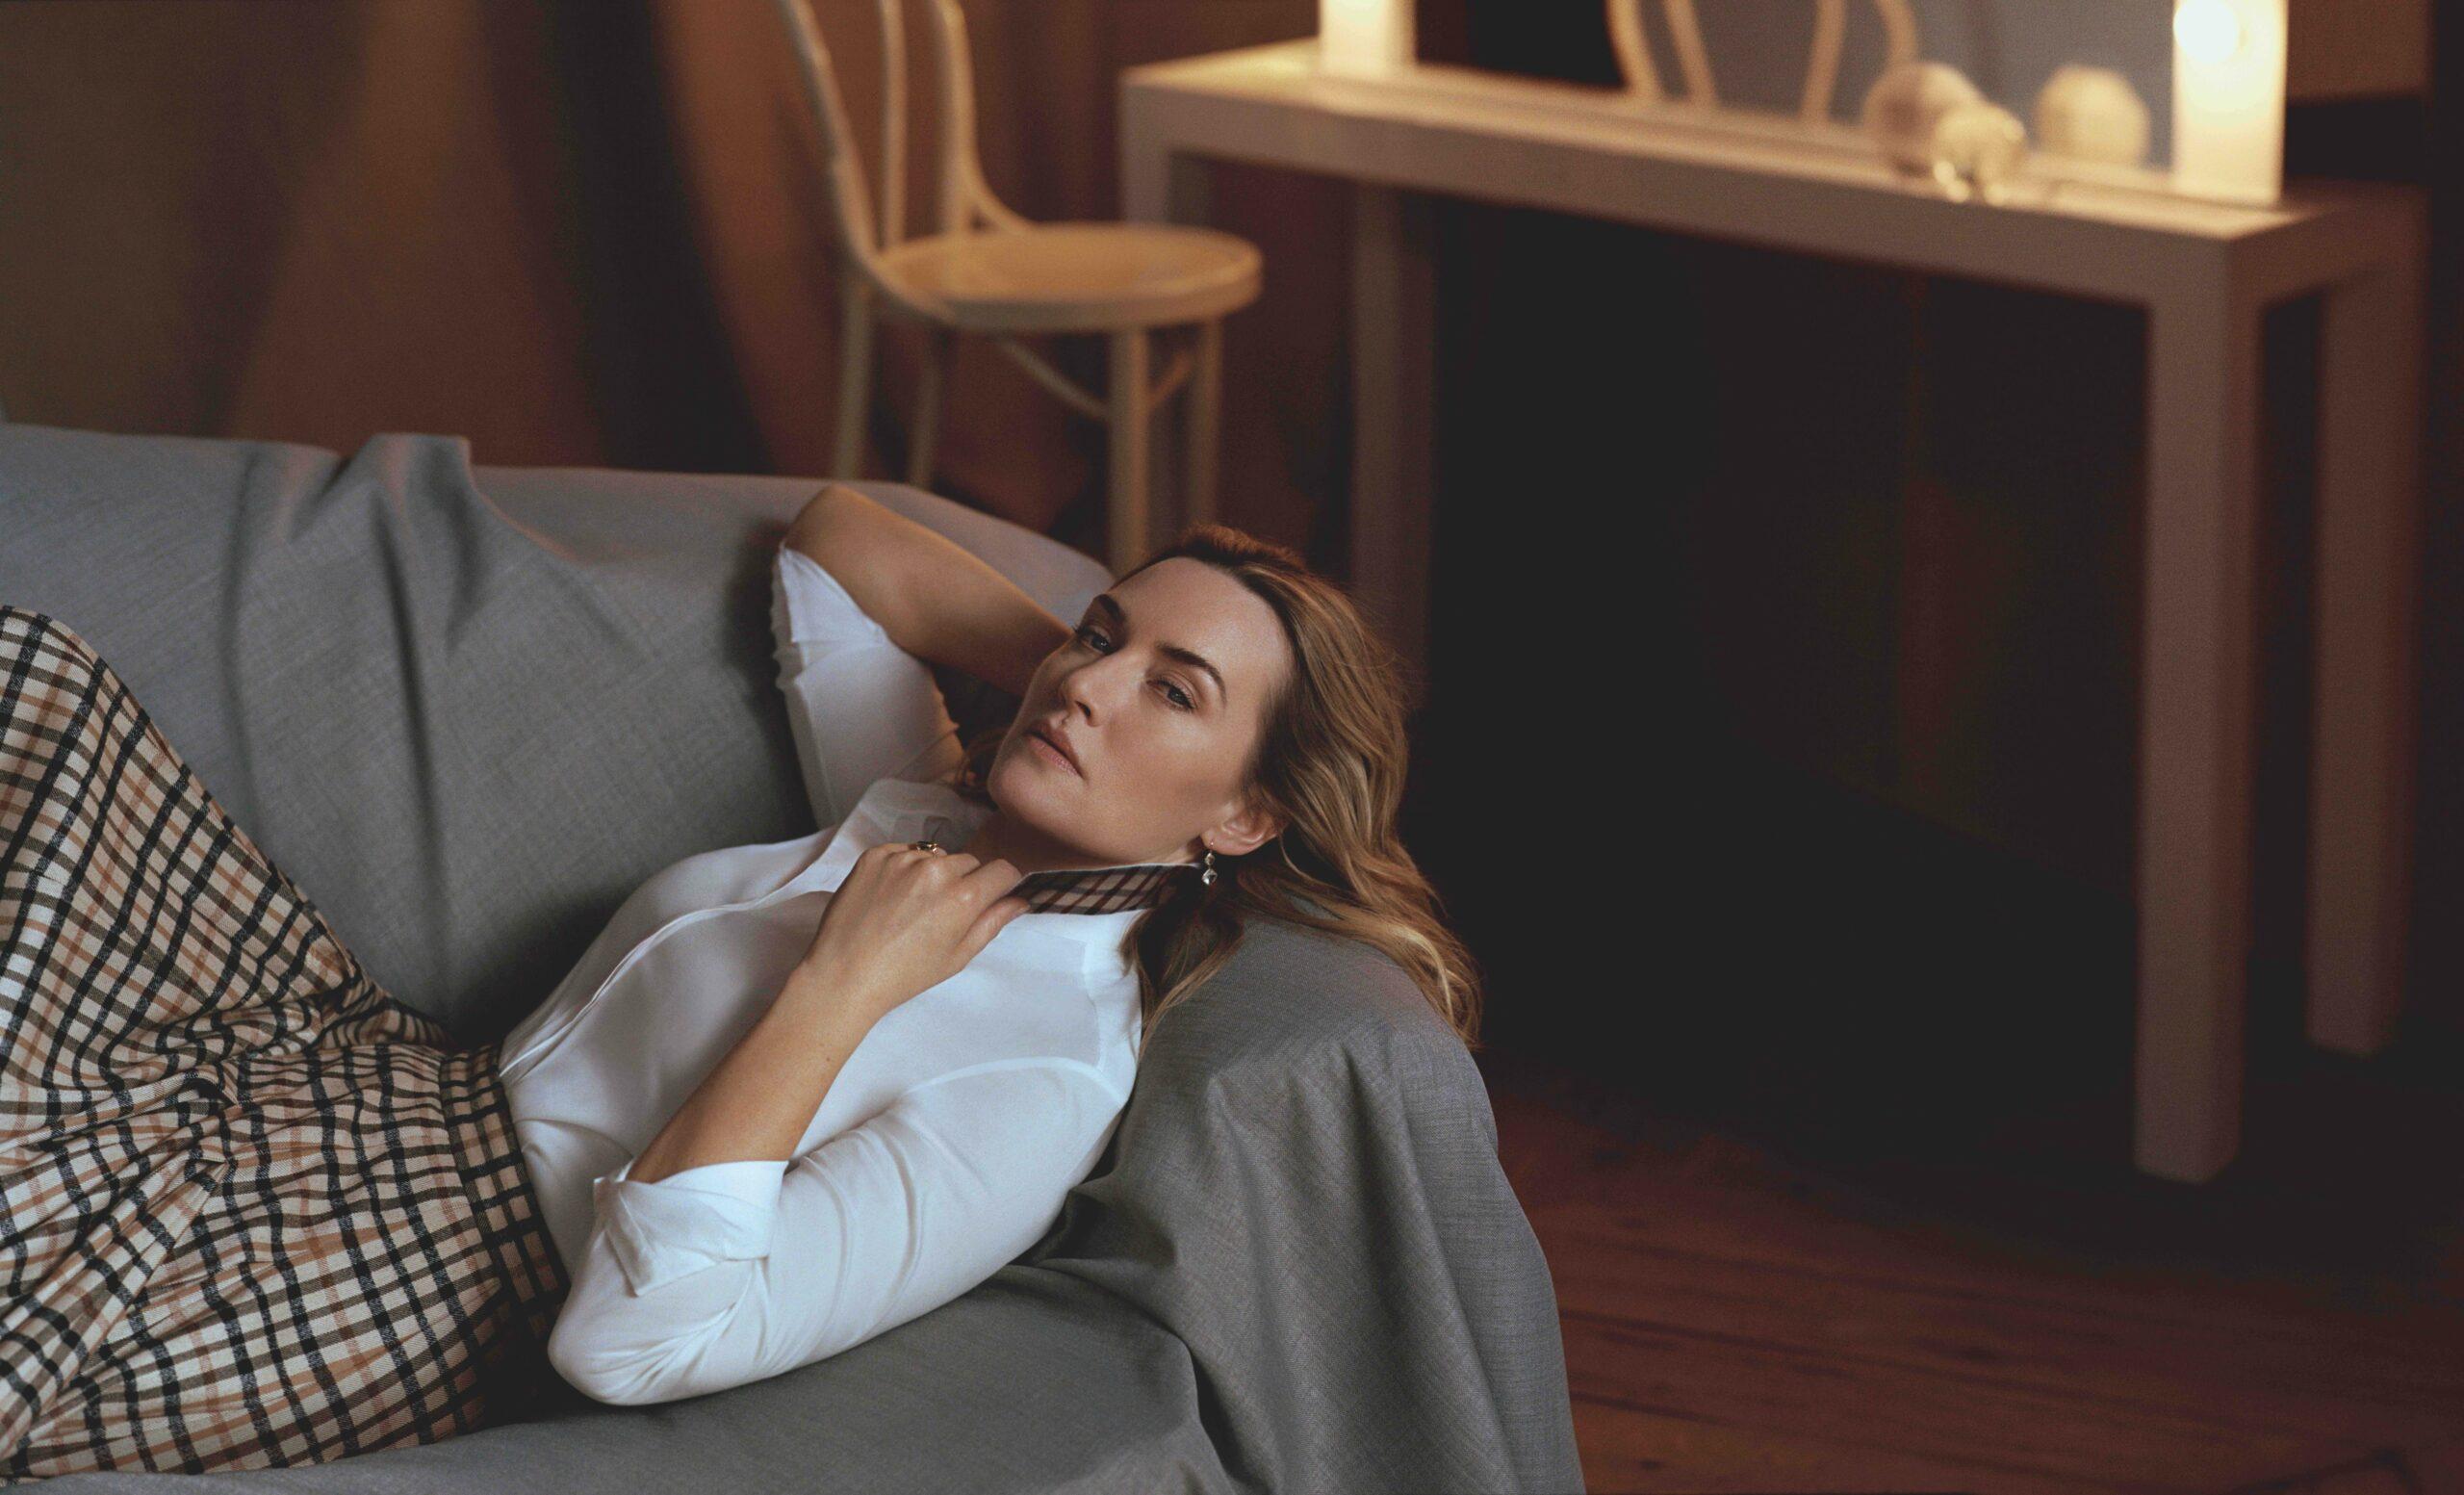 Kate Winslet stars in the DAKS fashion campaign.